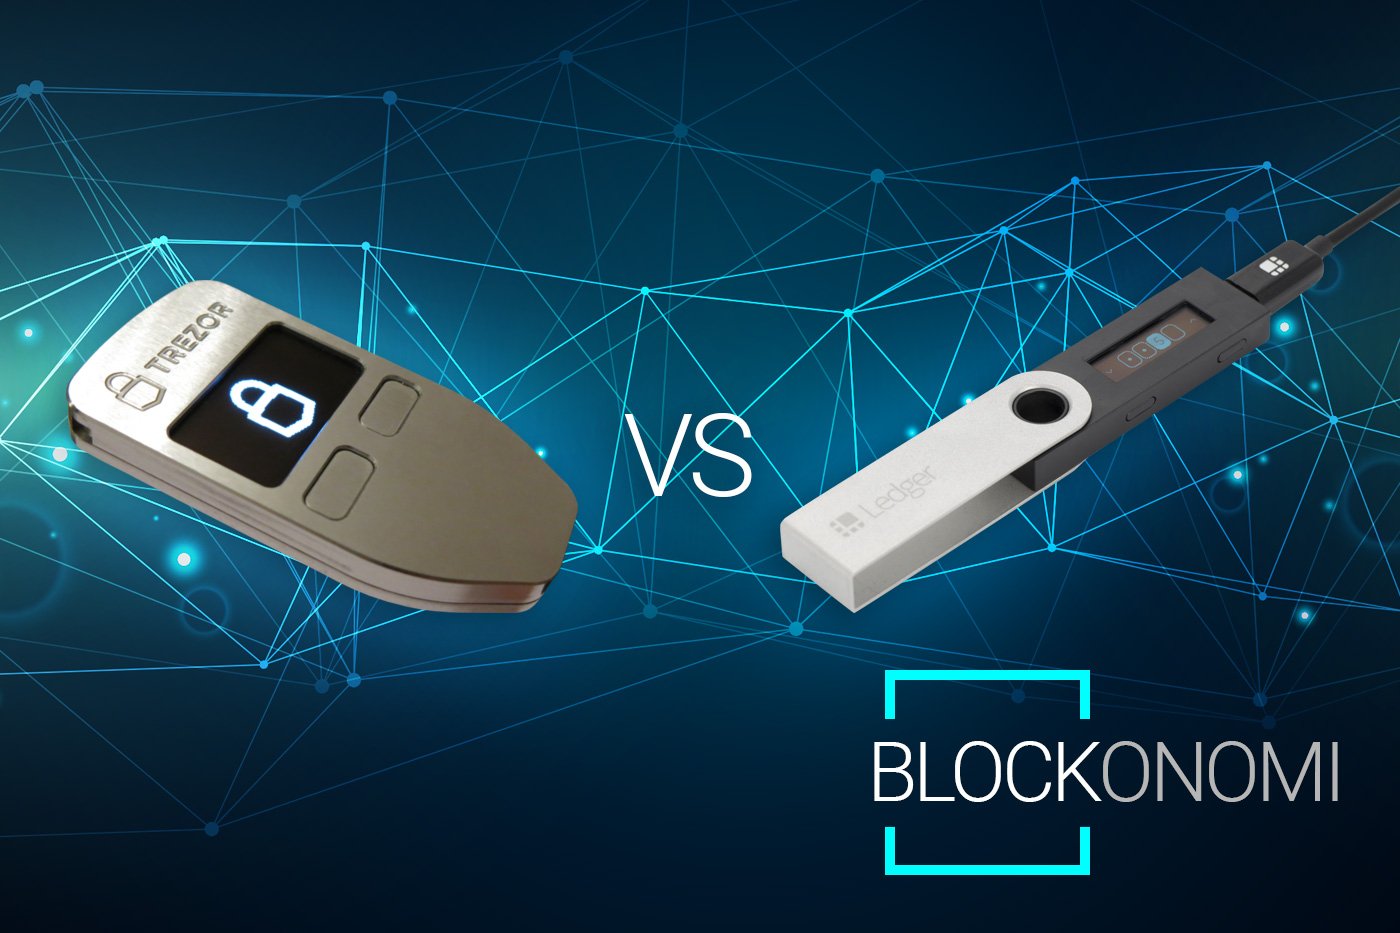 What Is a Hardware Wallet? | Ledger